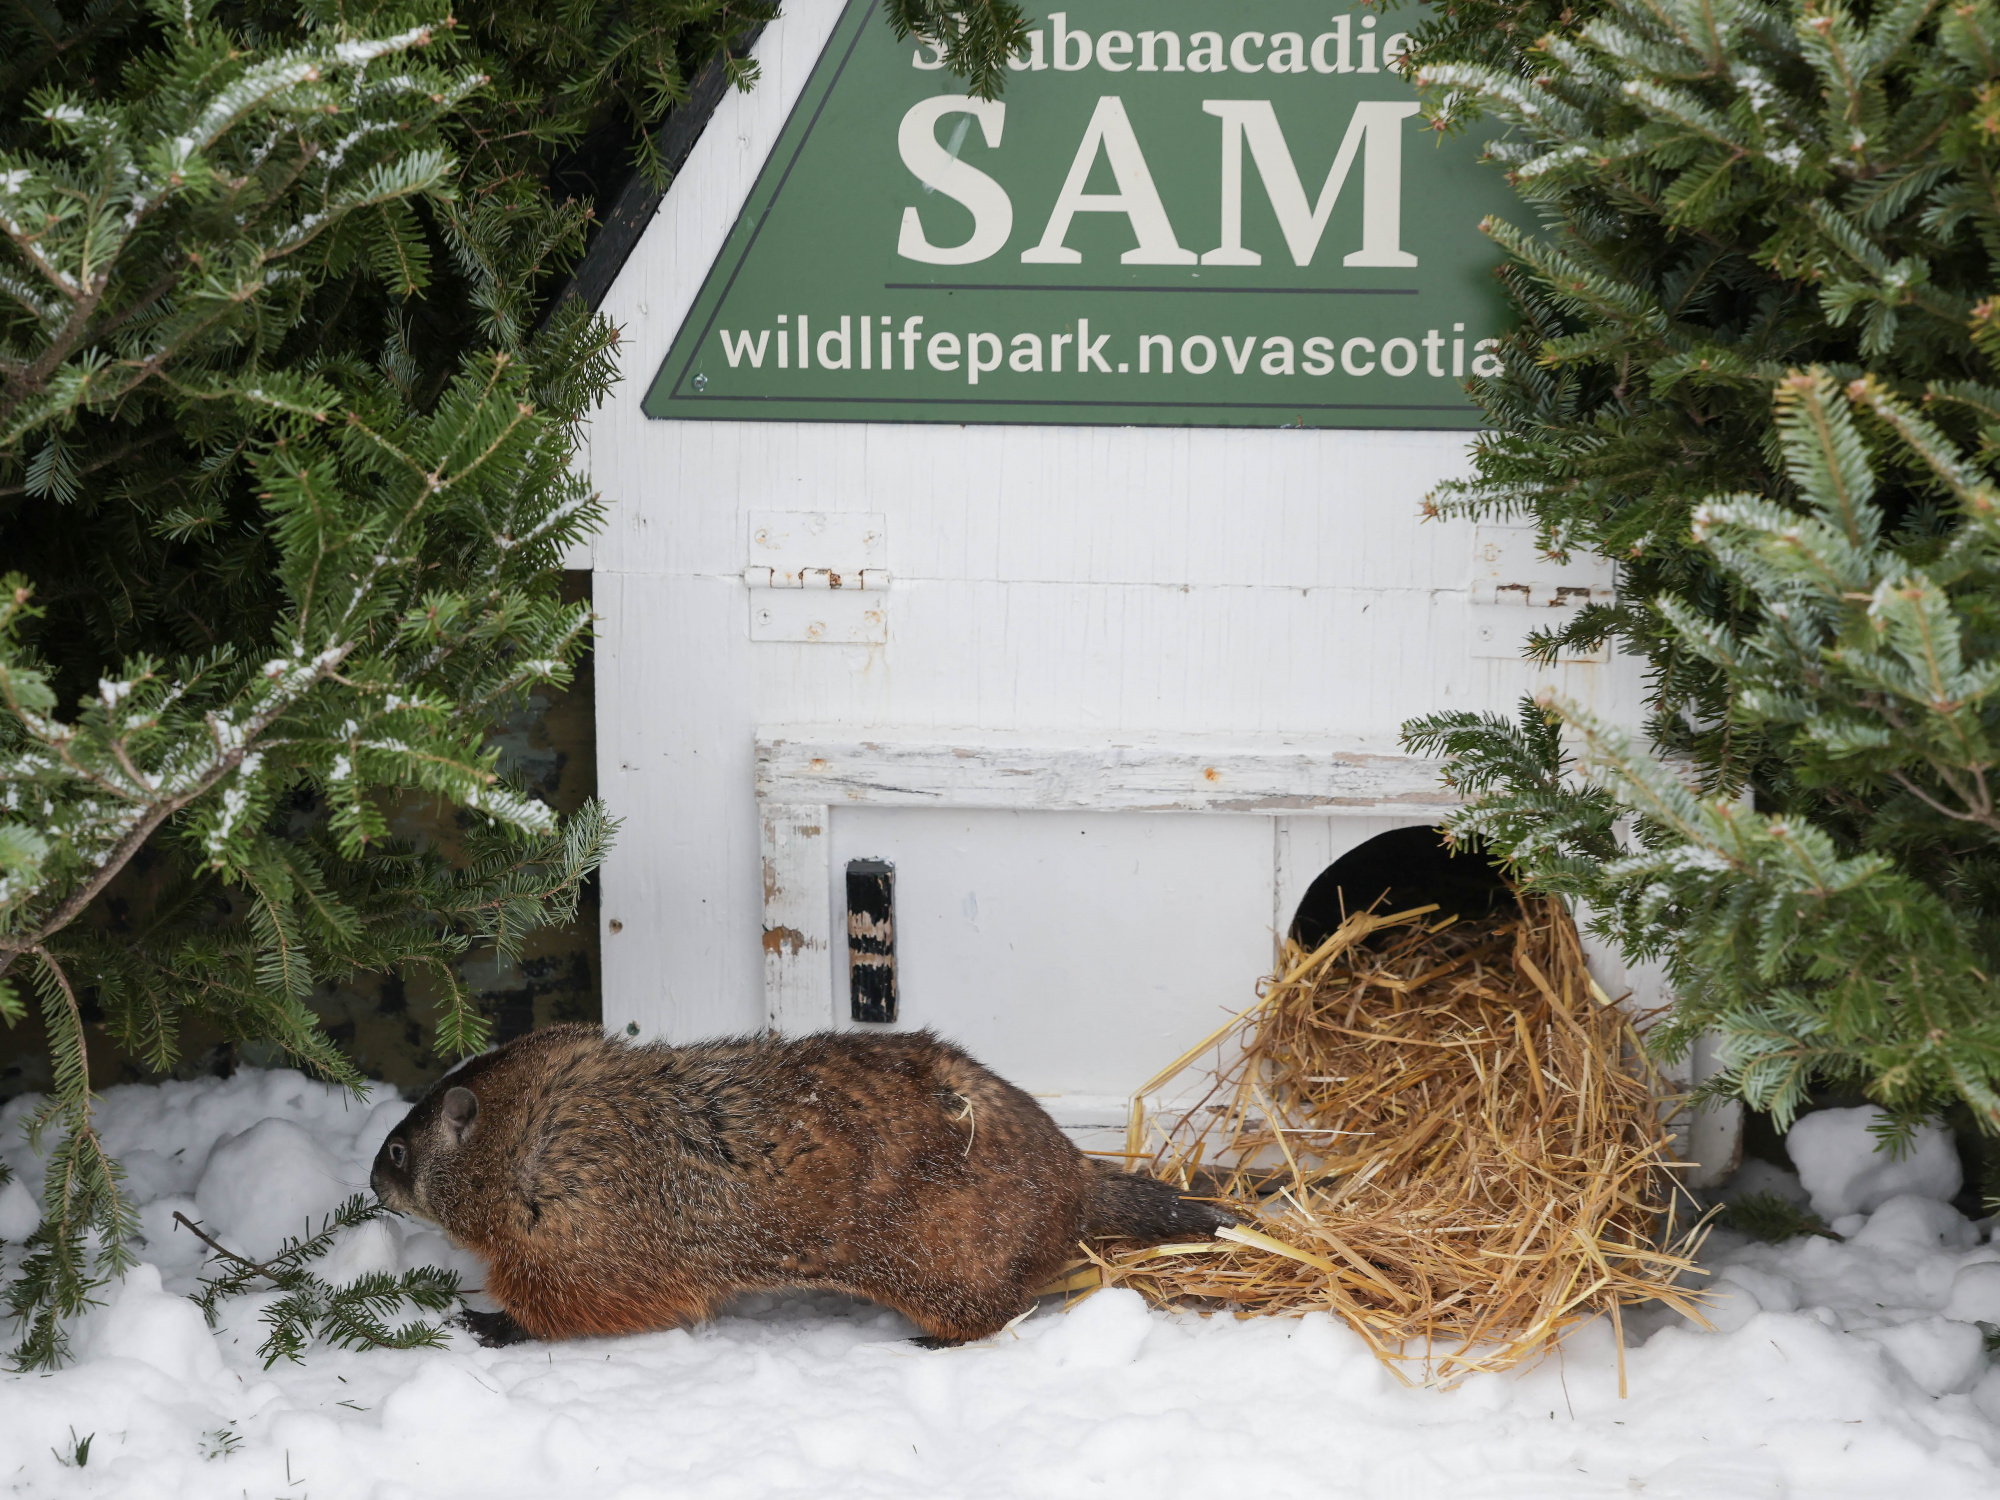 Photo of a groundhog in the snow outside its little house that has a sign saying Shubenacadie Sam